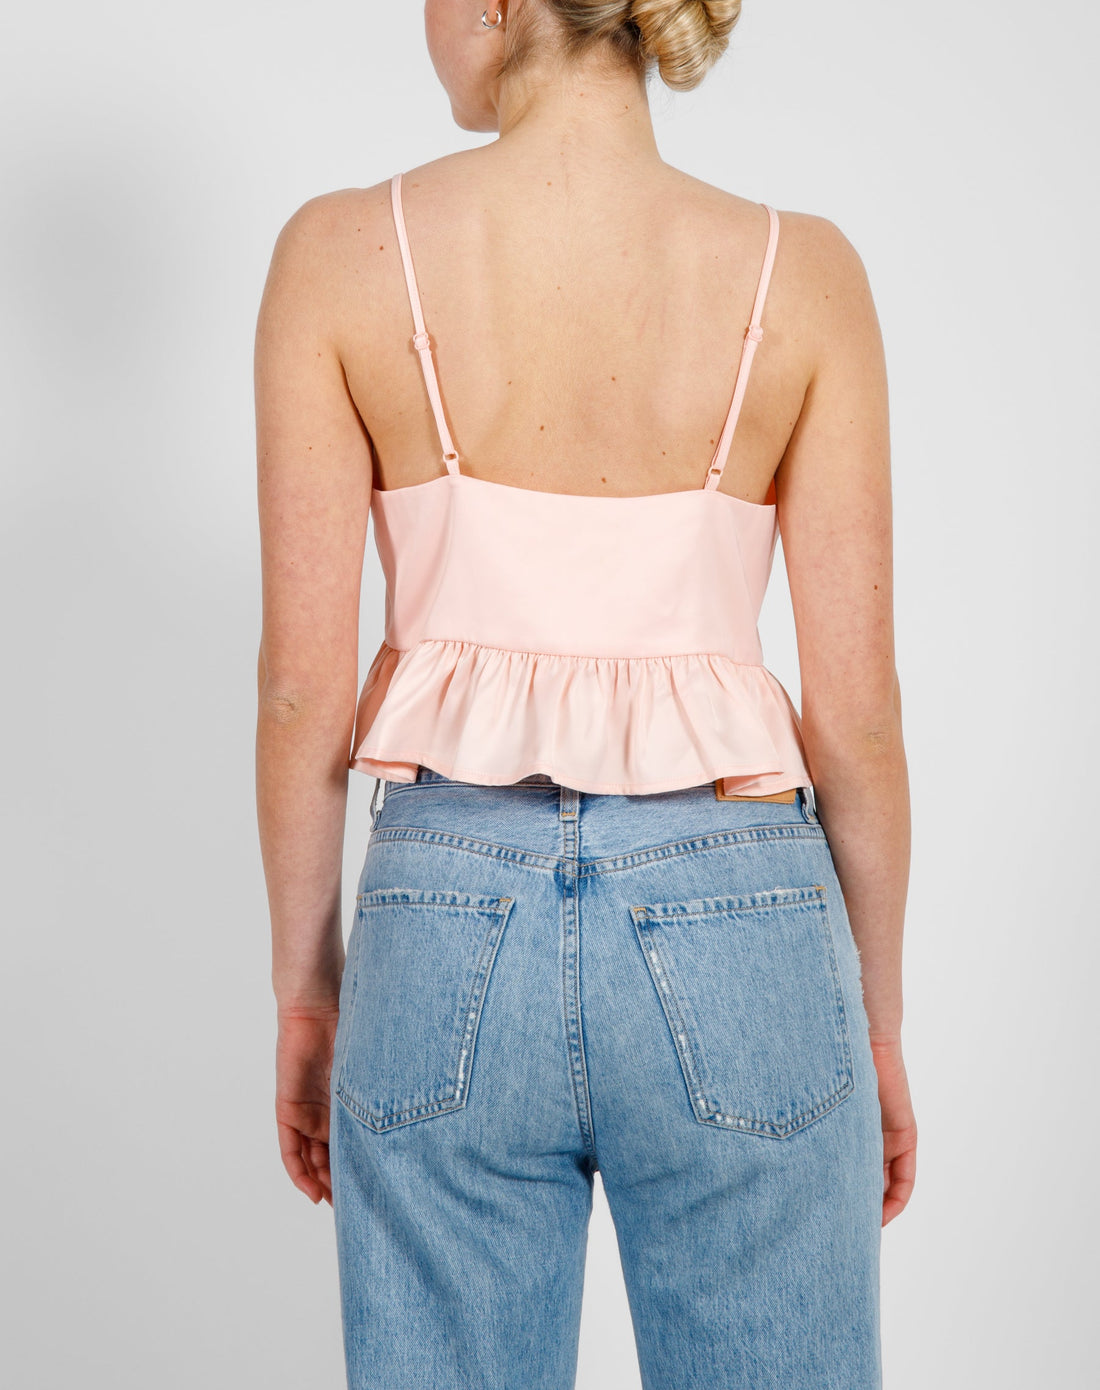 BRUNETTE THE LABEL SATIN BABY DOLL CROP TOP - PINK TOP BRUNETTE THE LABEL   